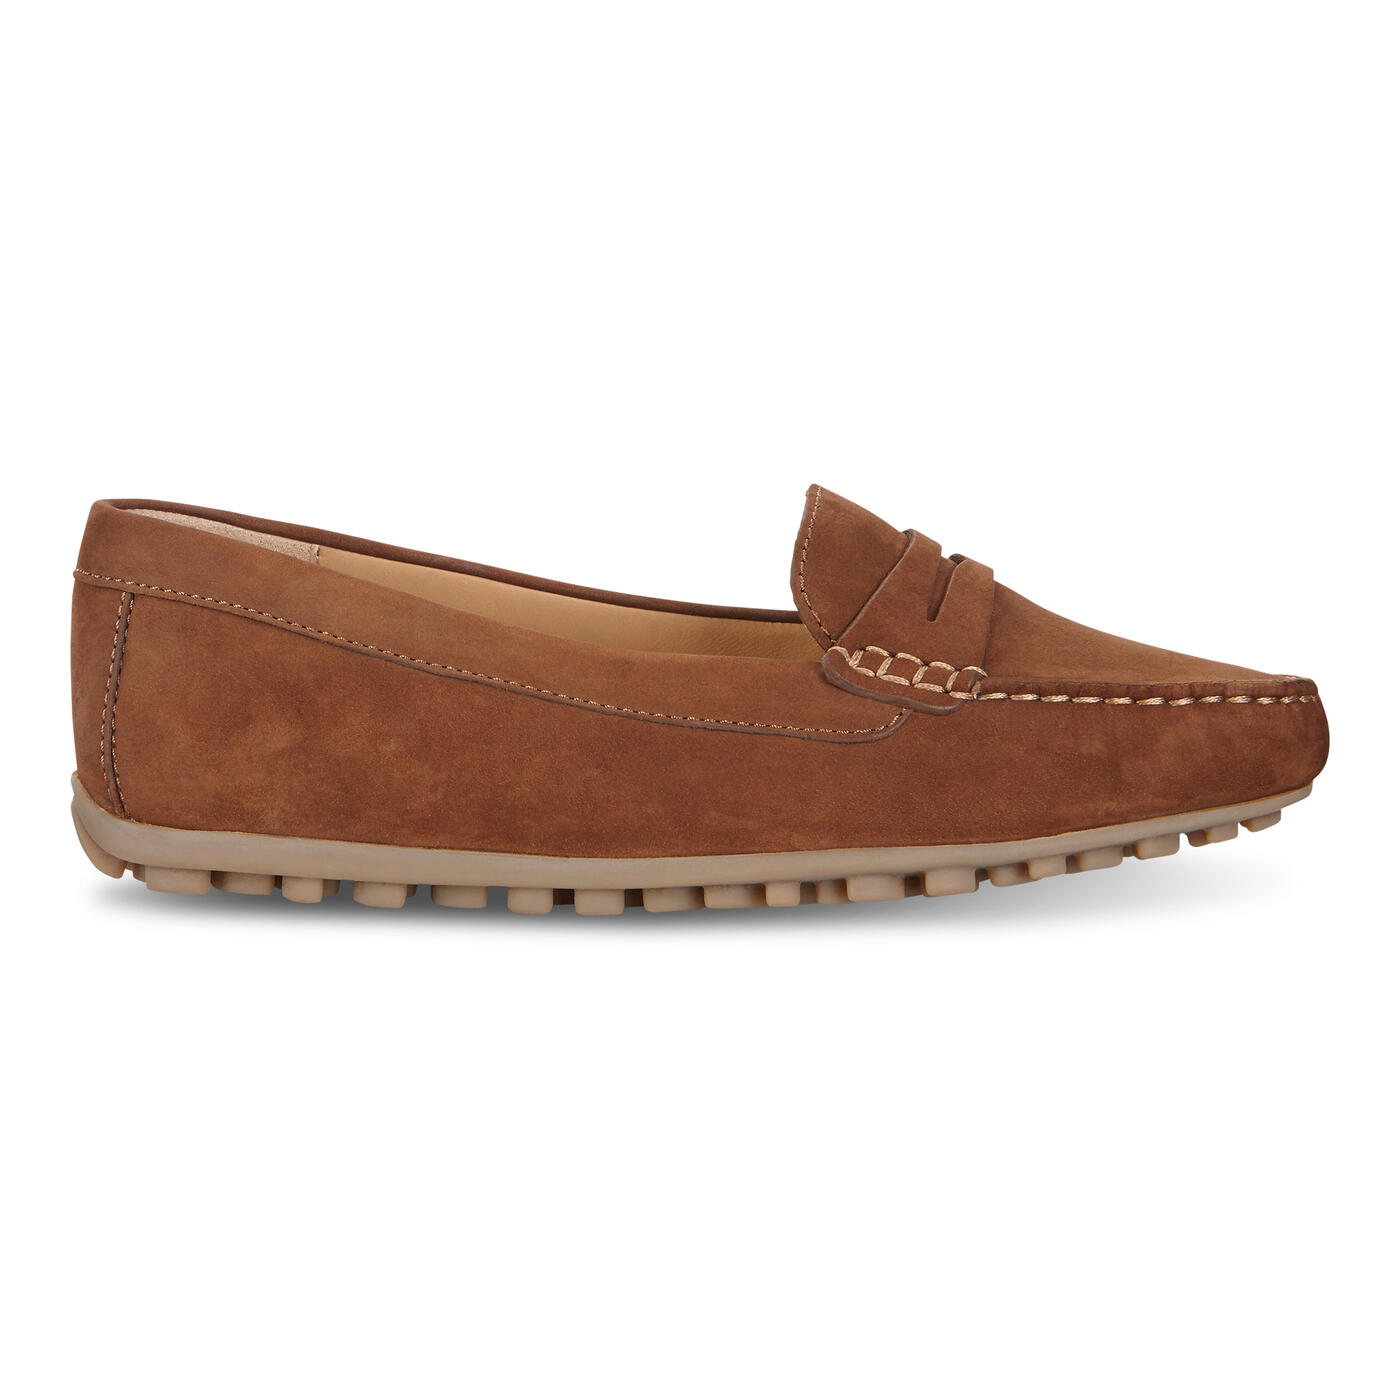 ECCO Devine Moc Penny Loafer | Women's Formal Shoes | ECCO® Shoes